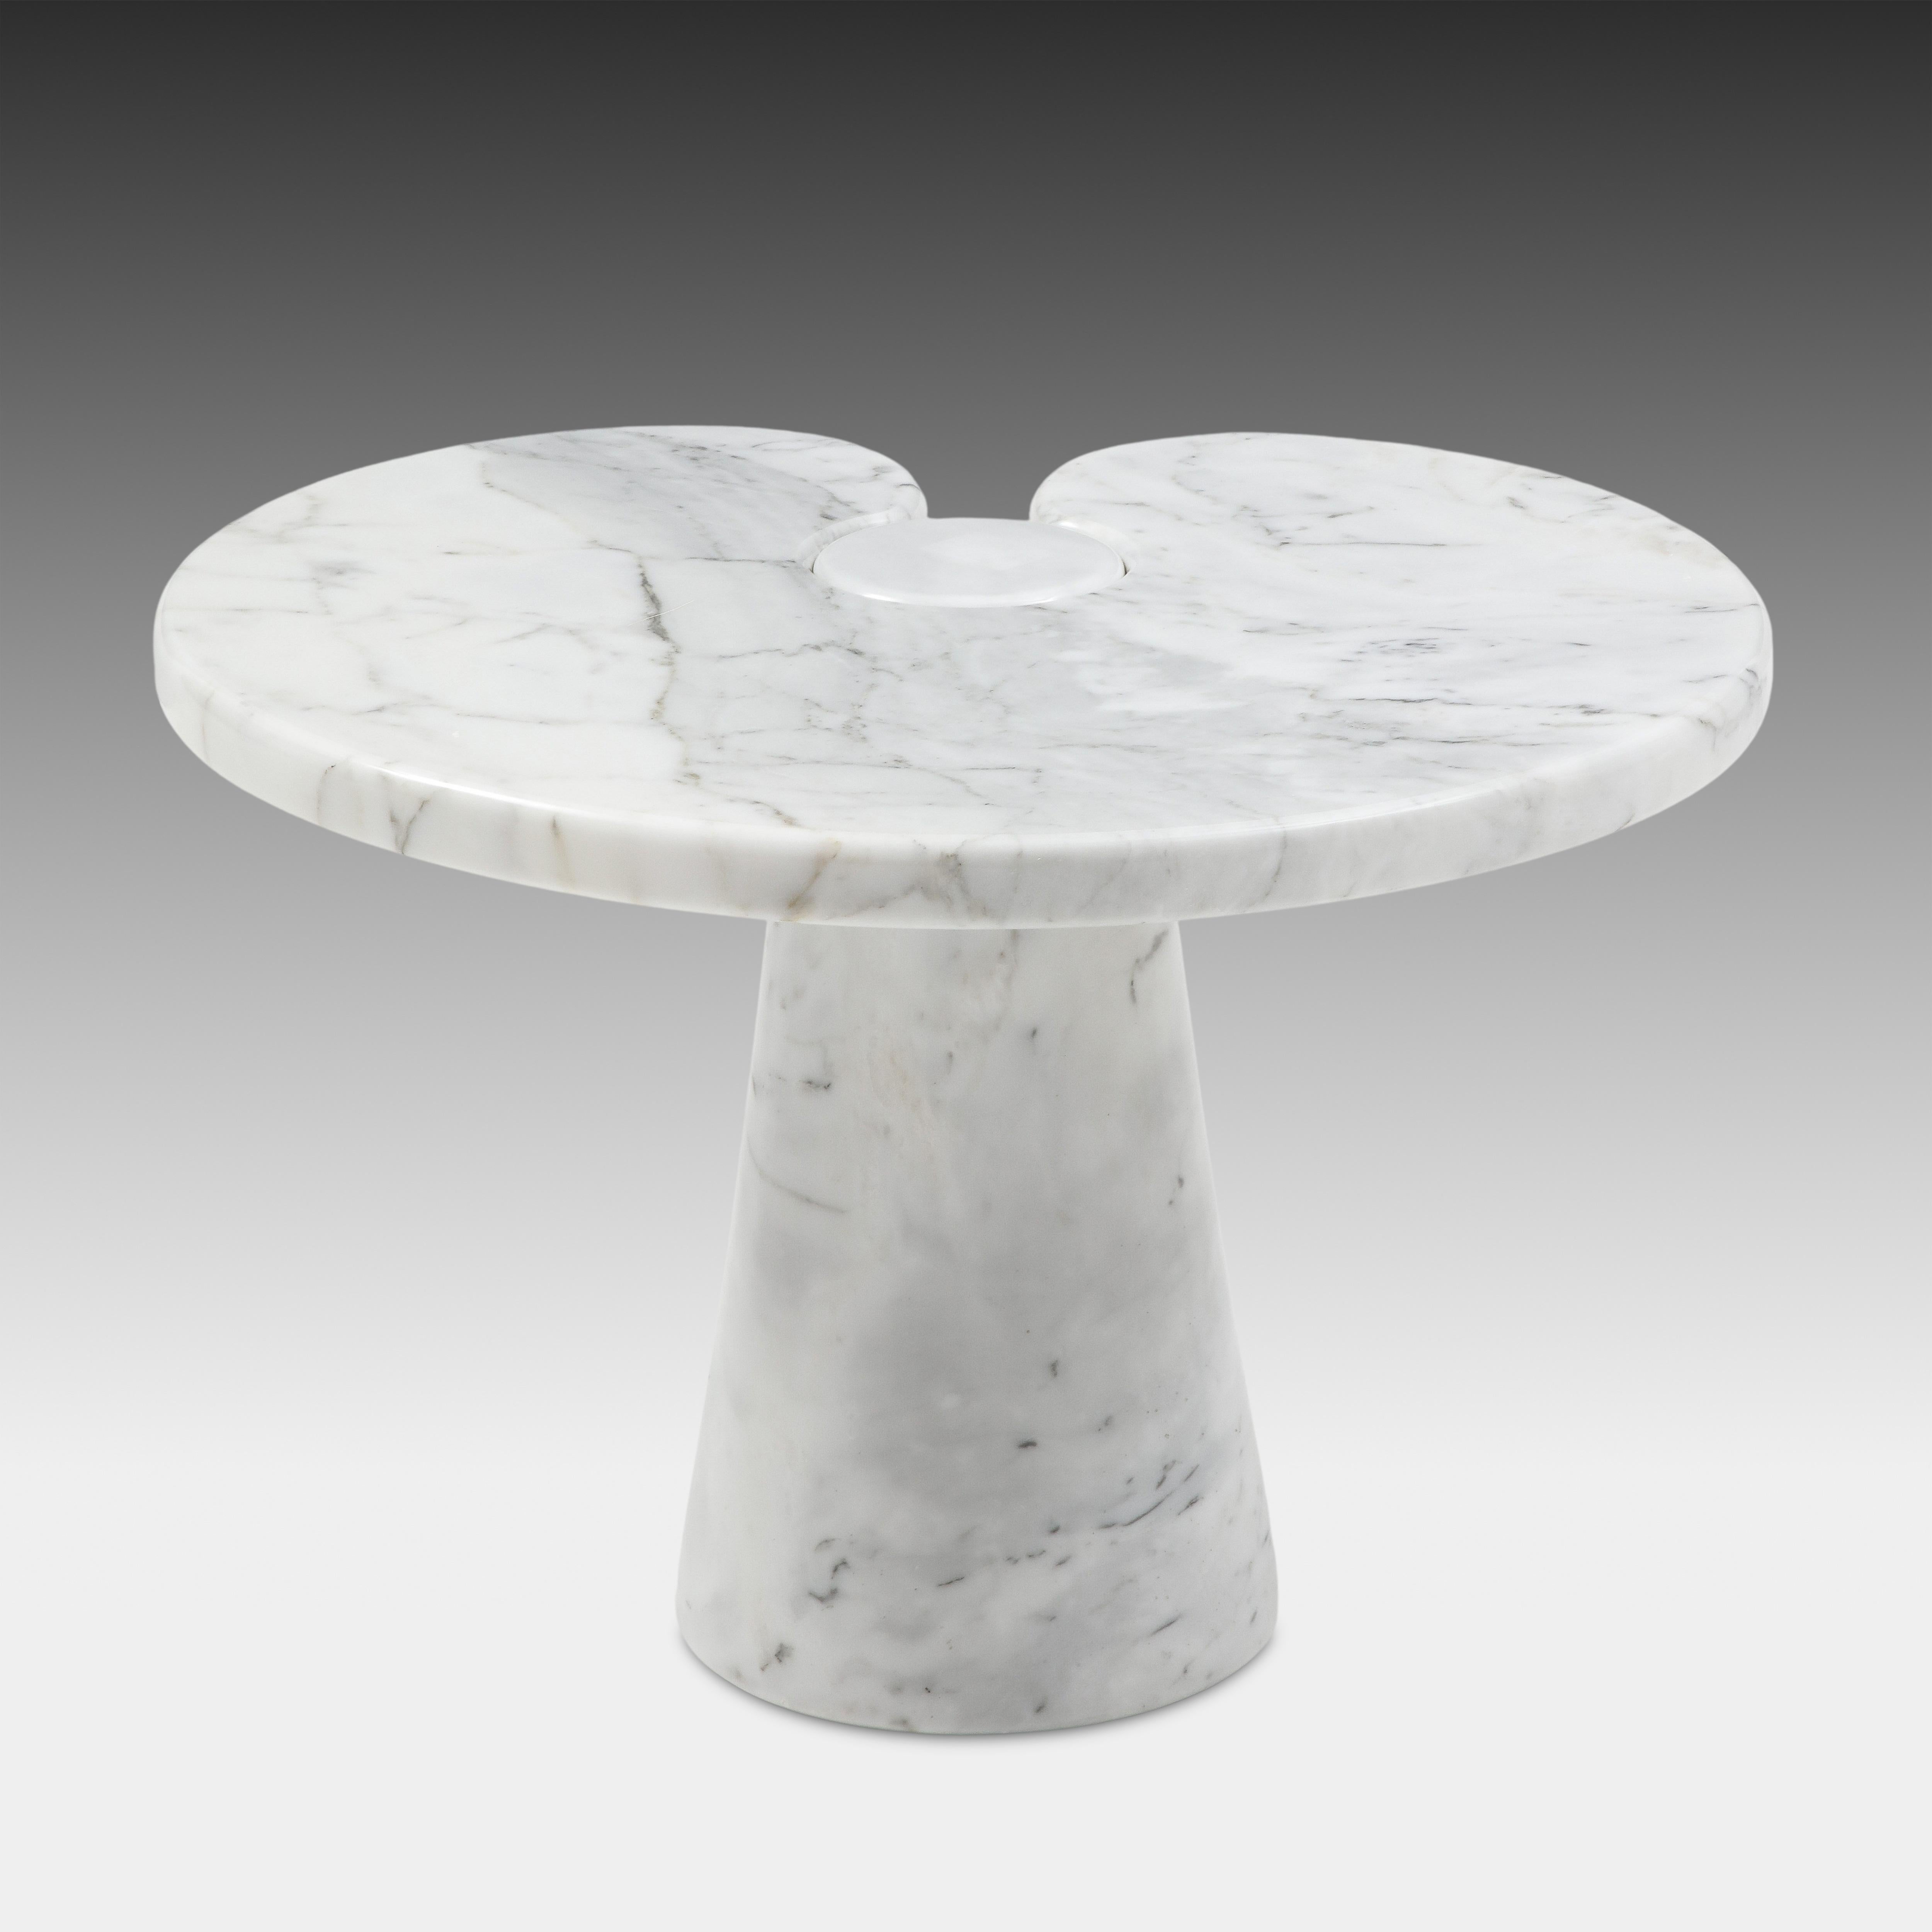 Polished Angelo Mangiarotti Carrara Marble Side Table from 'Eros' Series, 1971